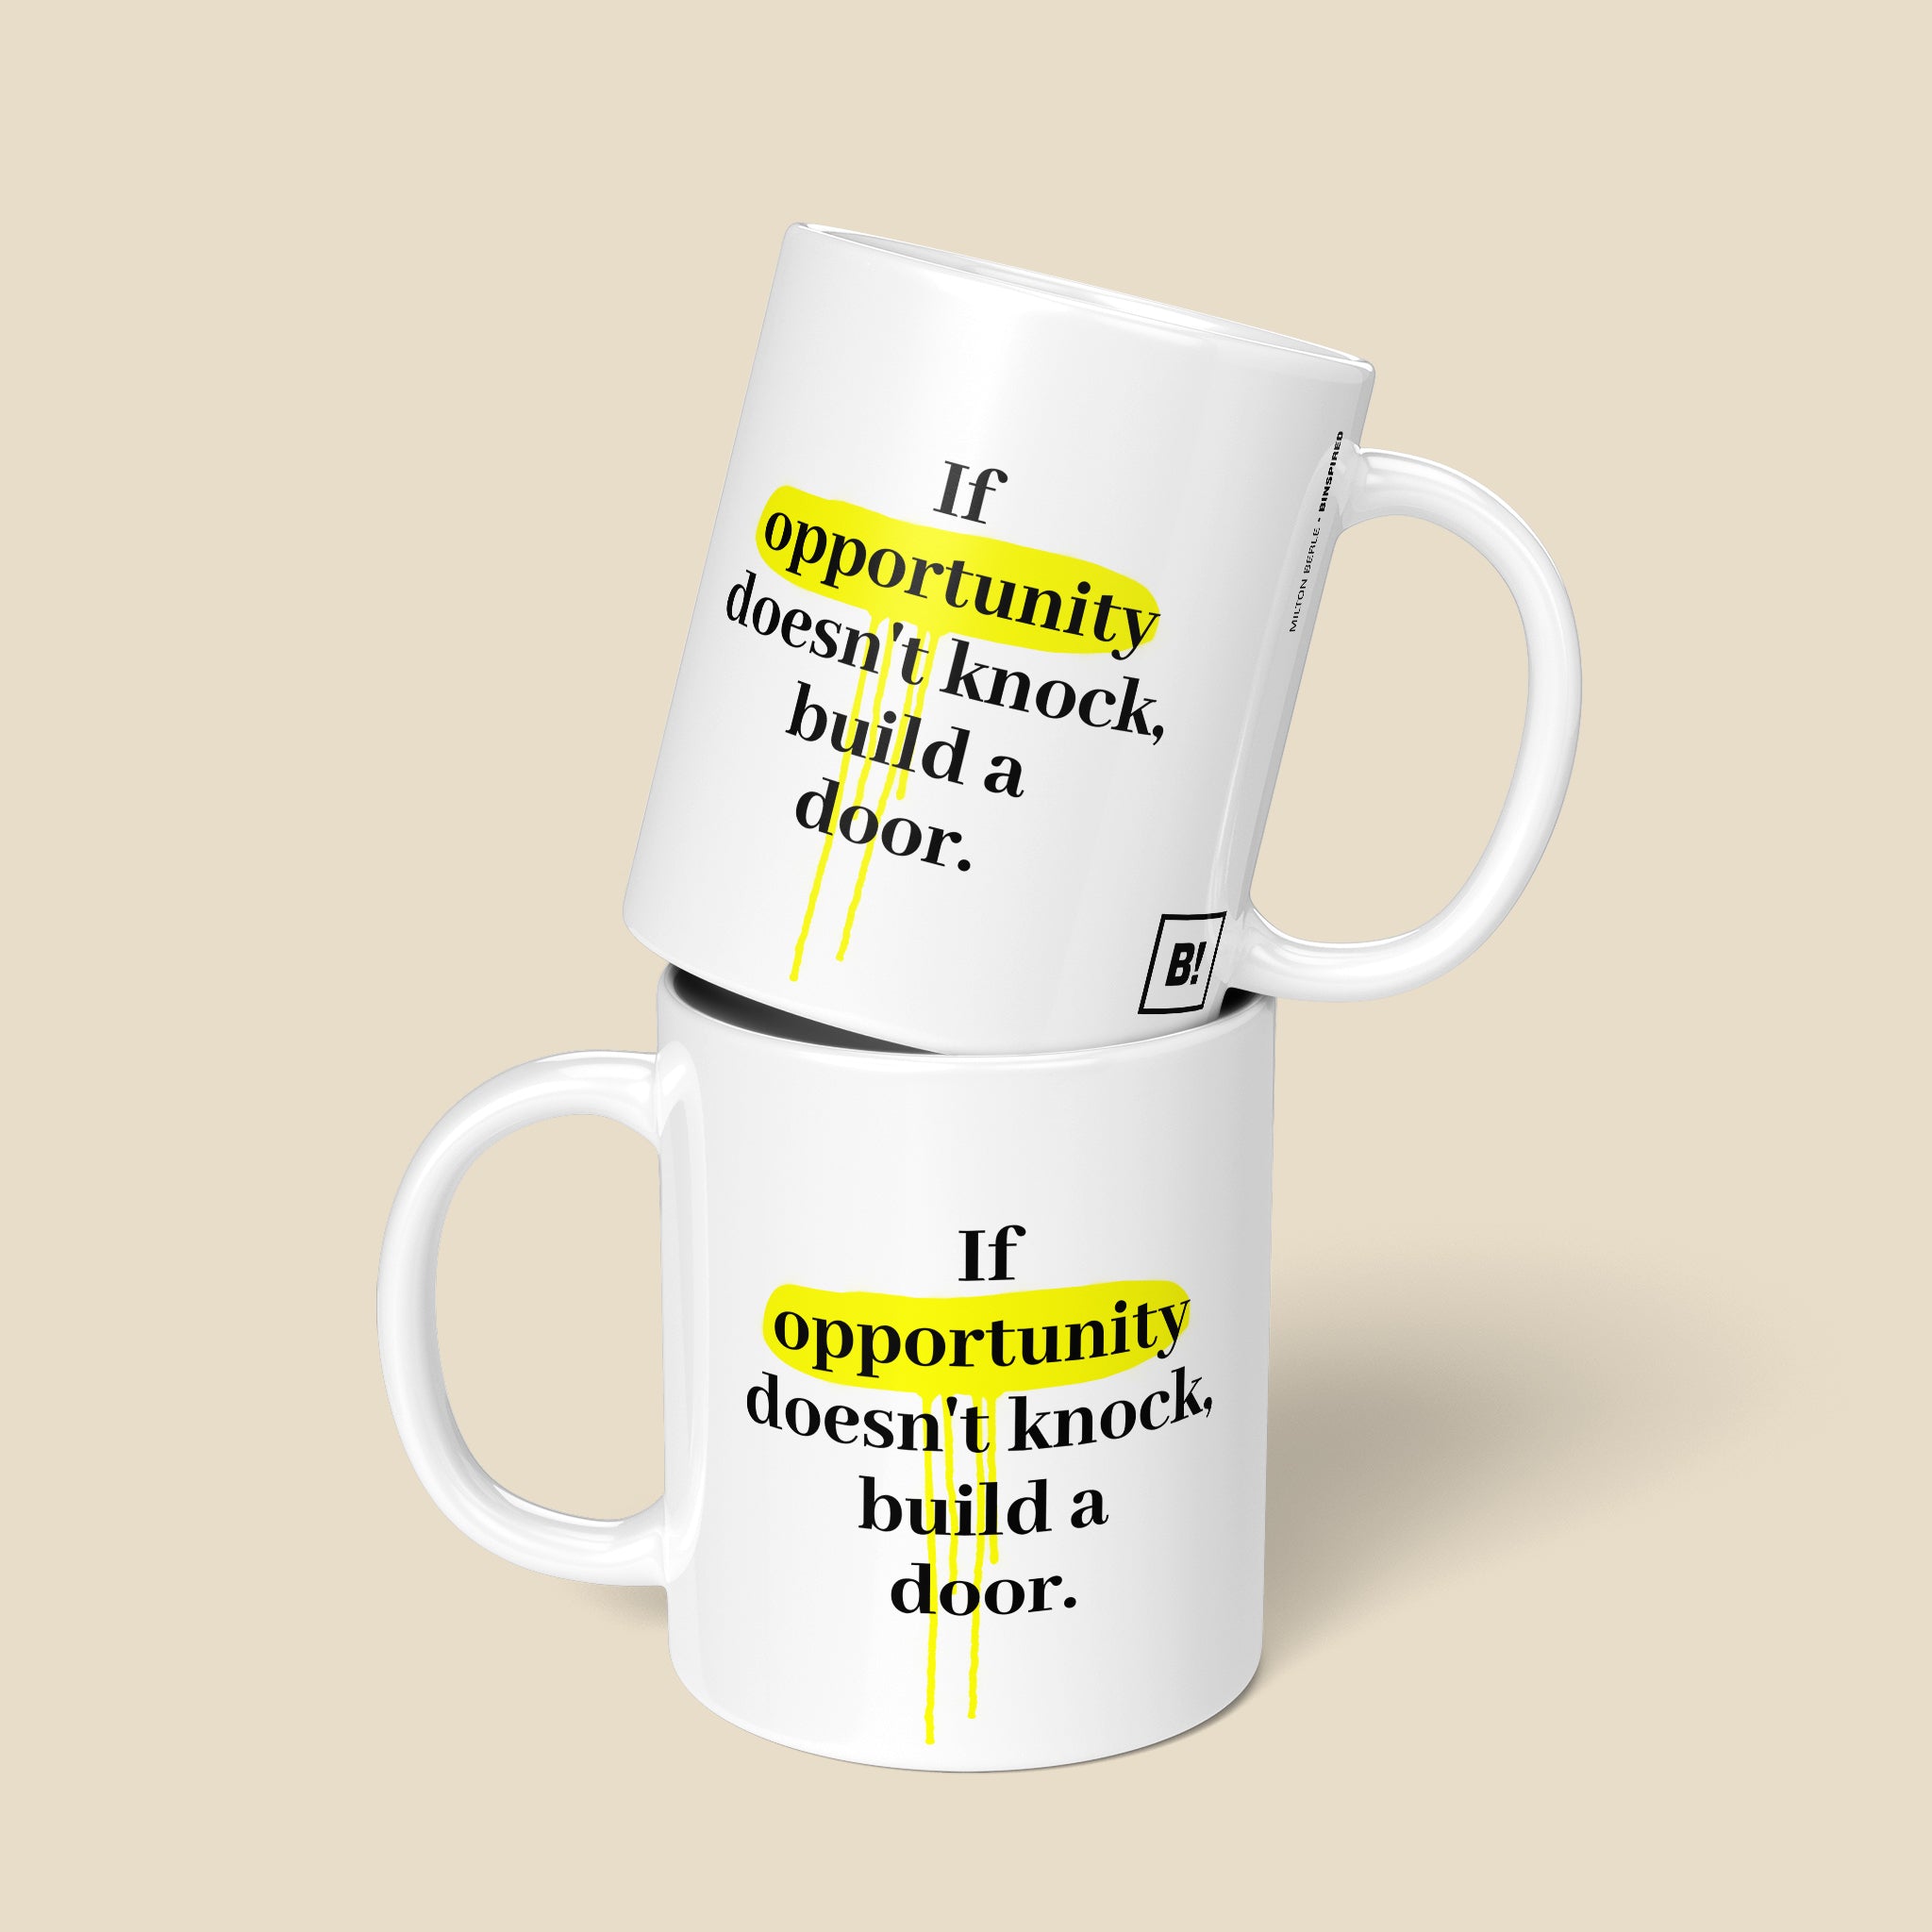 Be inspired by Milton Berle's famous quote, "If opportunity doesn't knock, build a door" on this 11oz white glossy coffee mug with a front and back view.